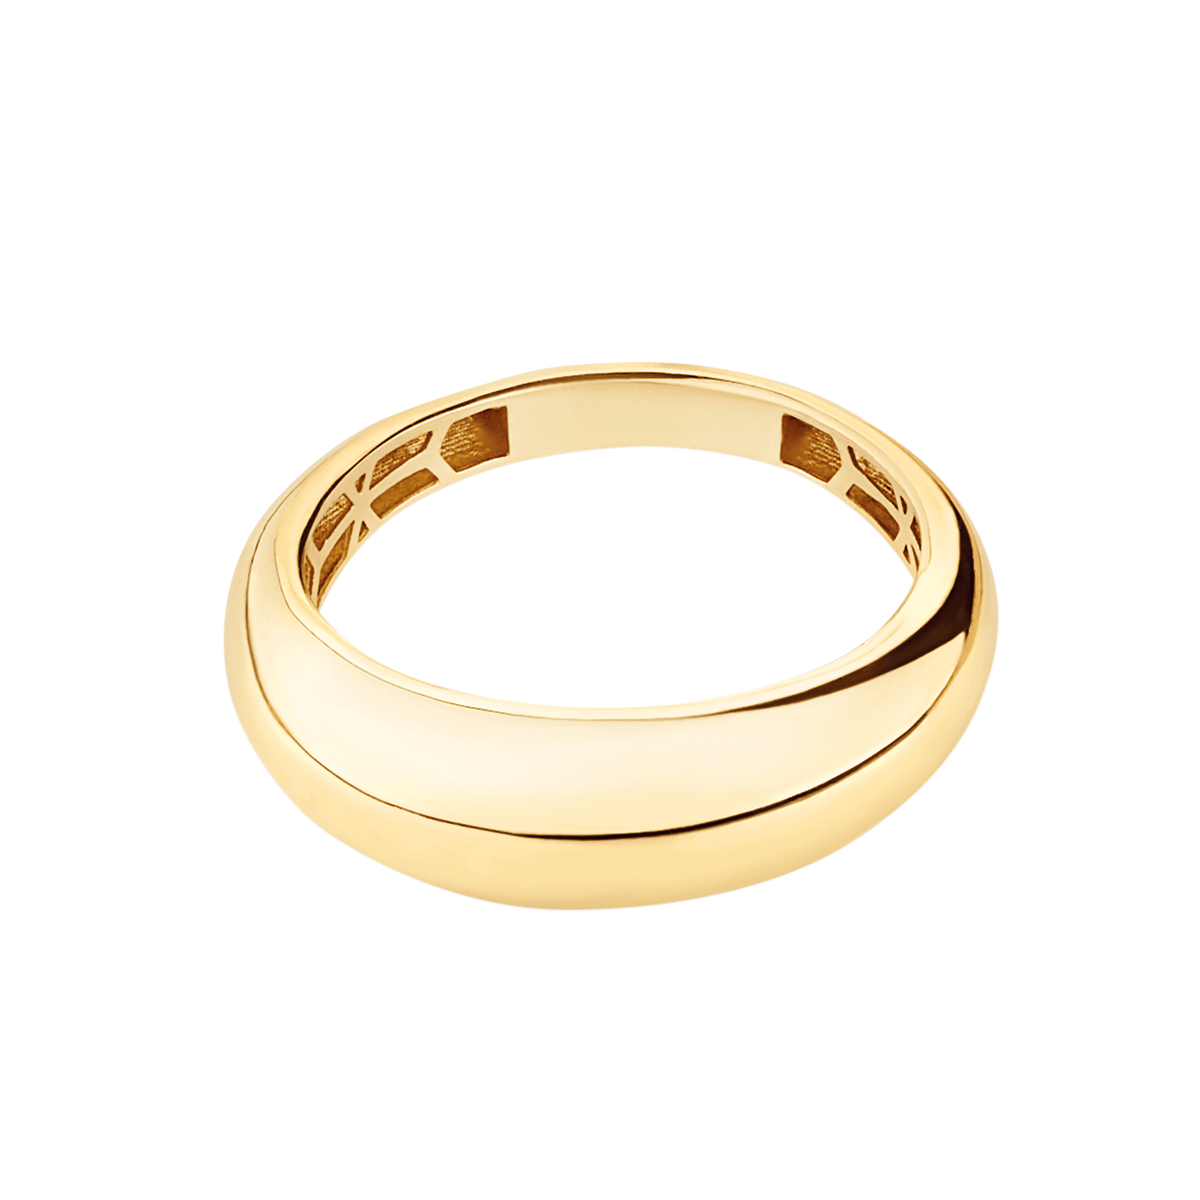 Dome Ring in 9ct Yellow Gold - Wallace Bishop